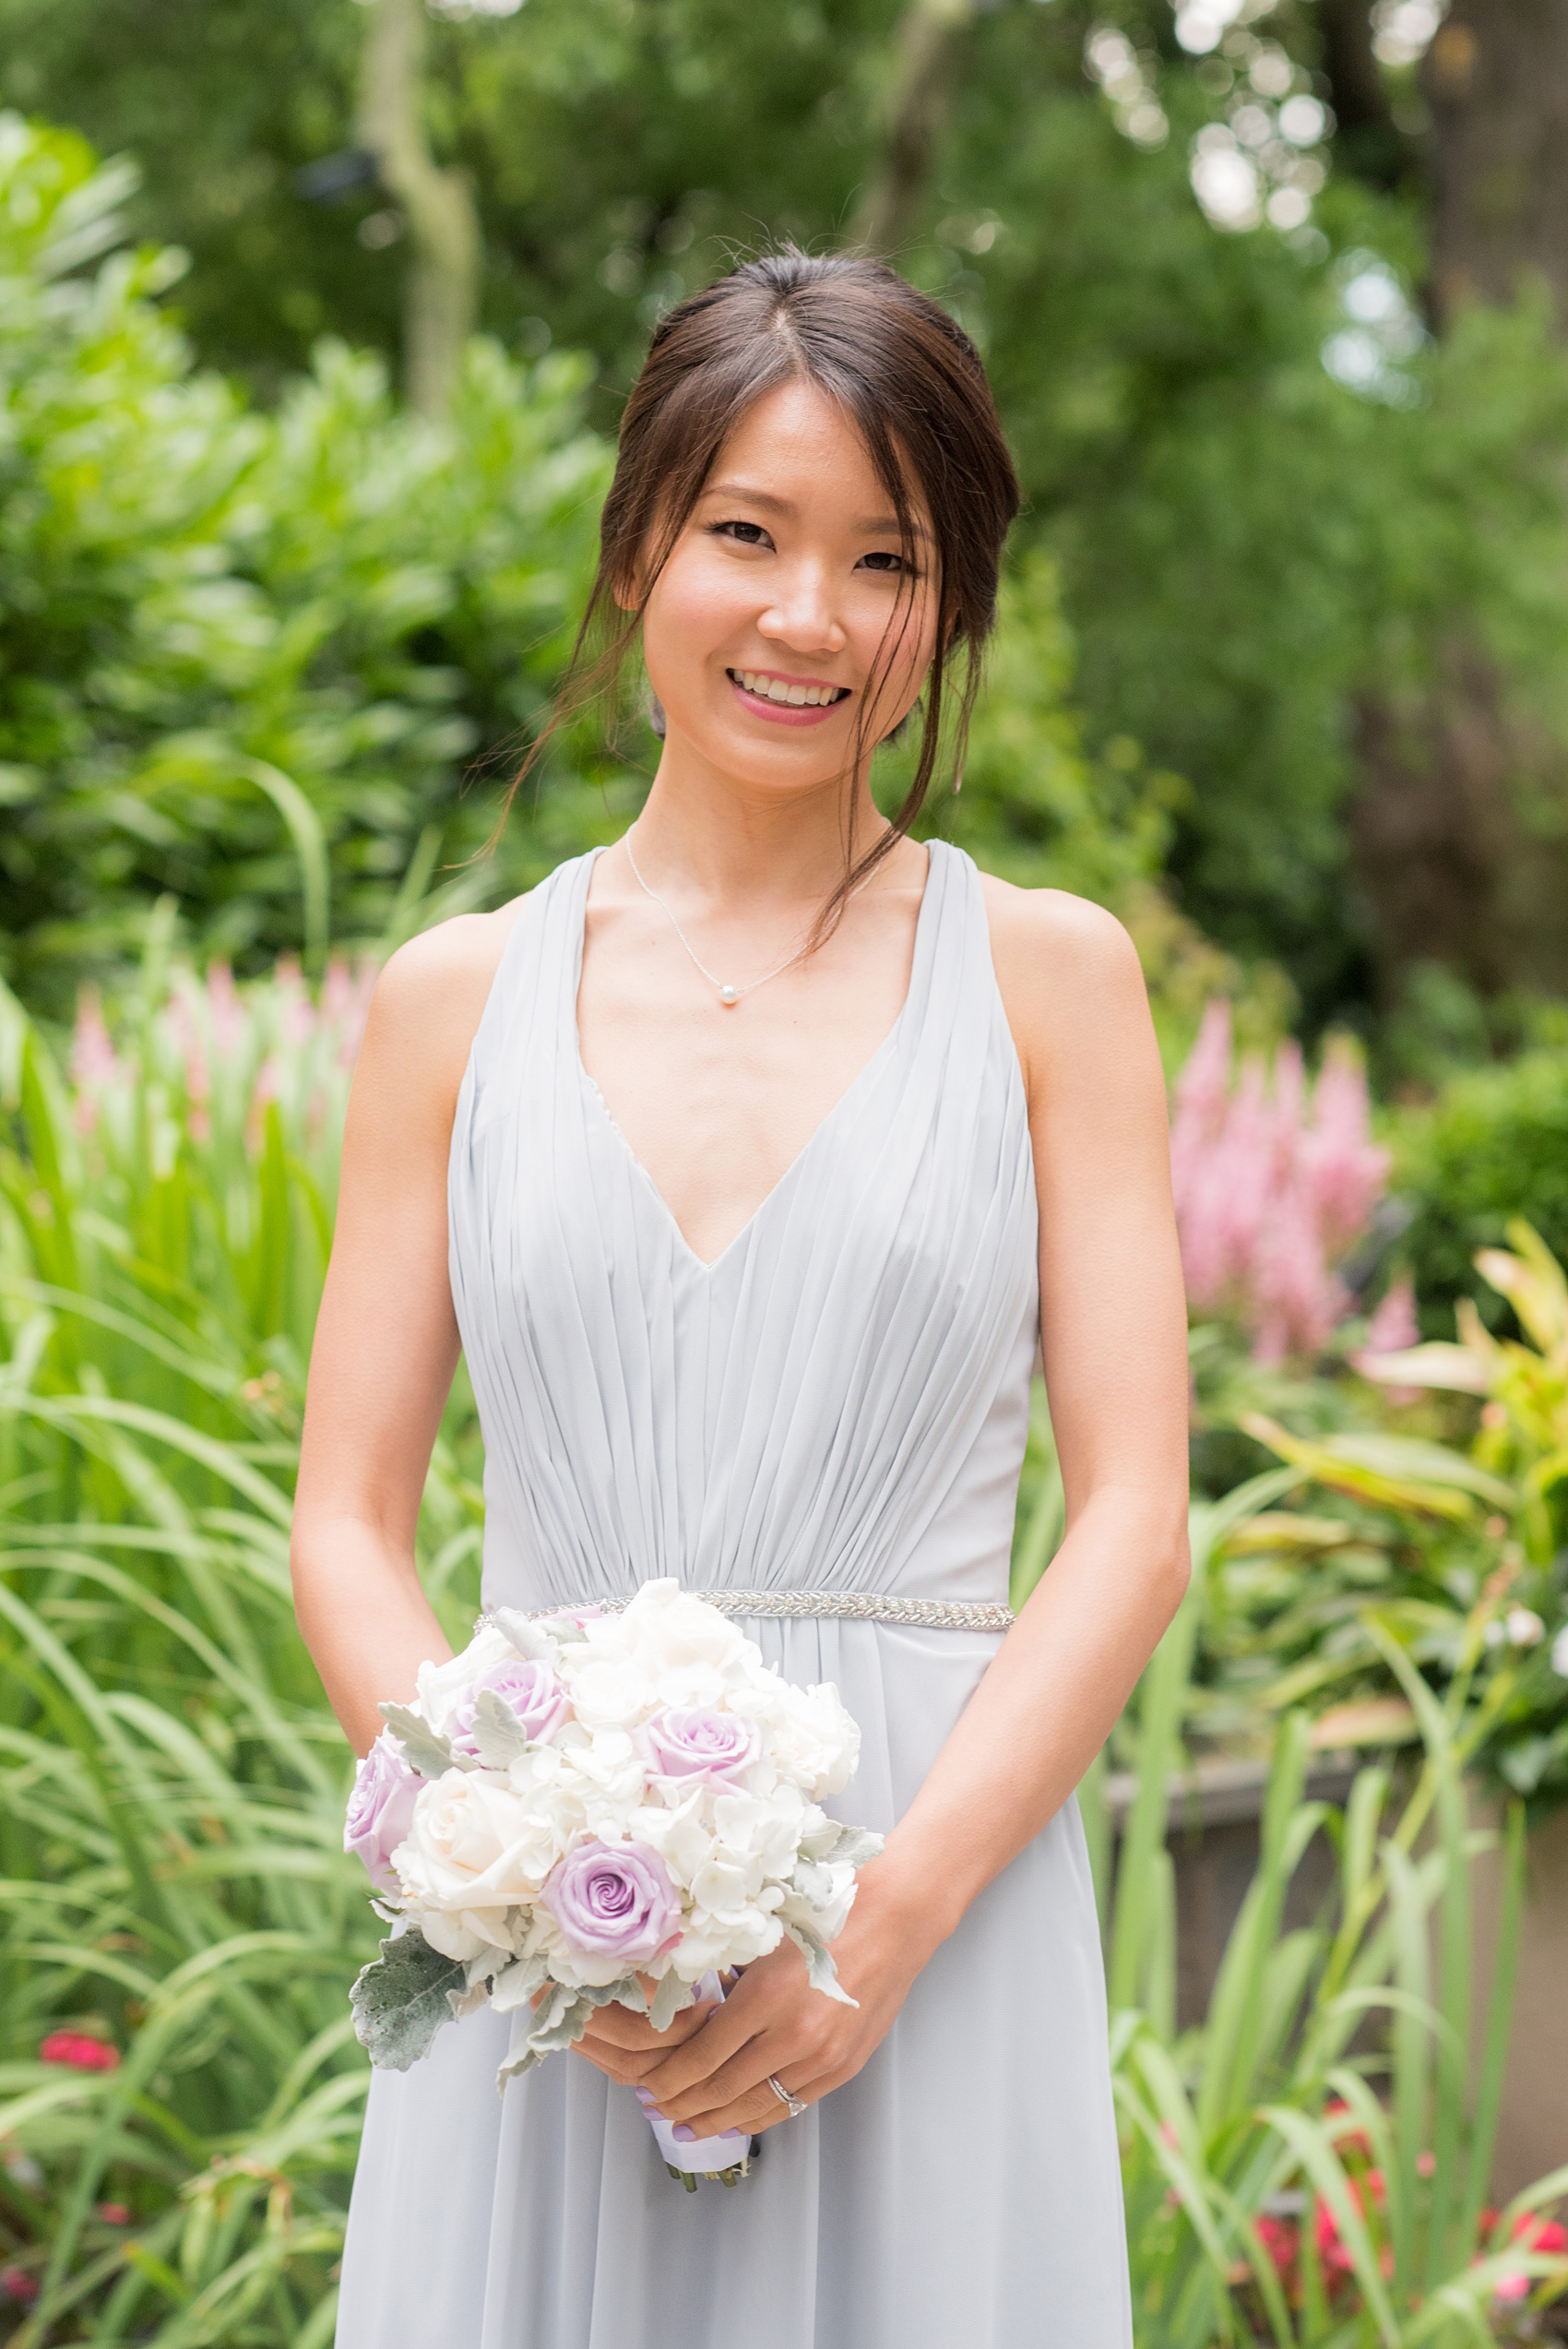 Mikkel Paige Photography pictures of a Westbury Manor wedding on Long Island. Photo of a bridesmaid in a blue-grey gowns with a white and lavender bouquet.